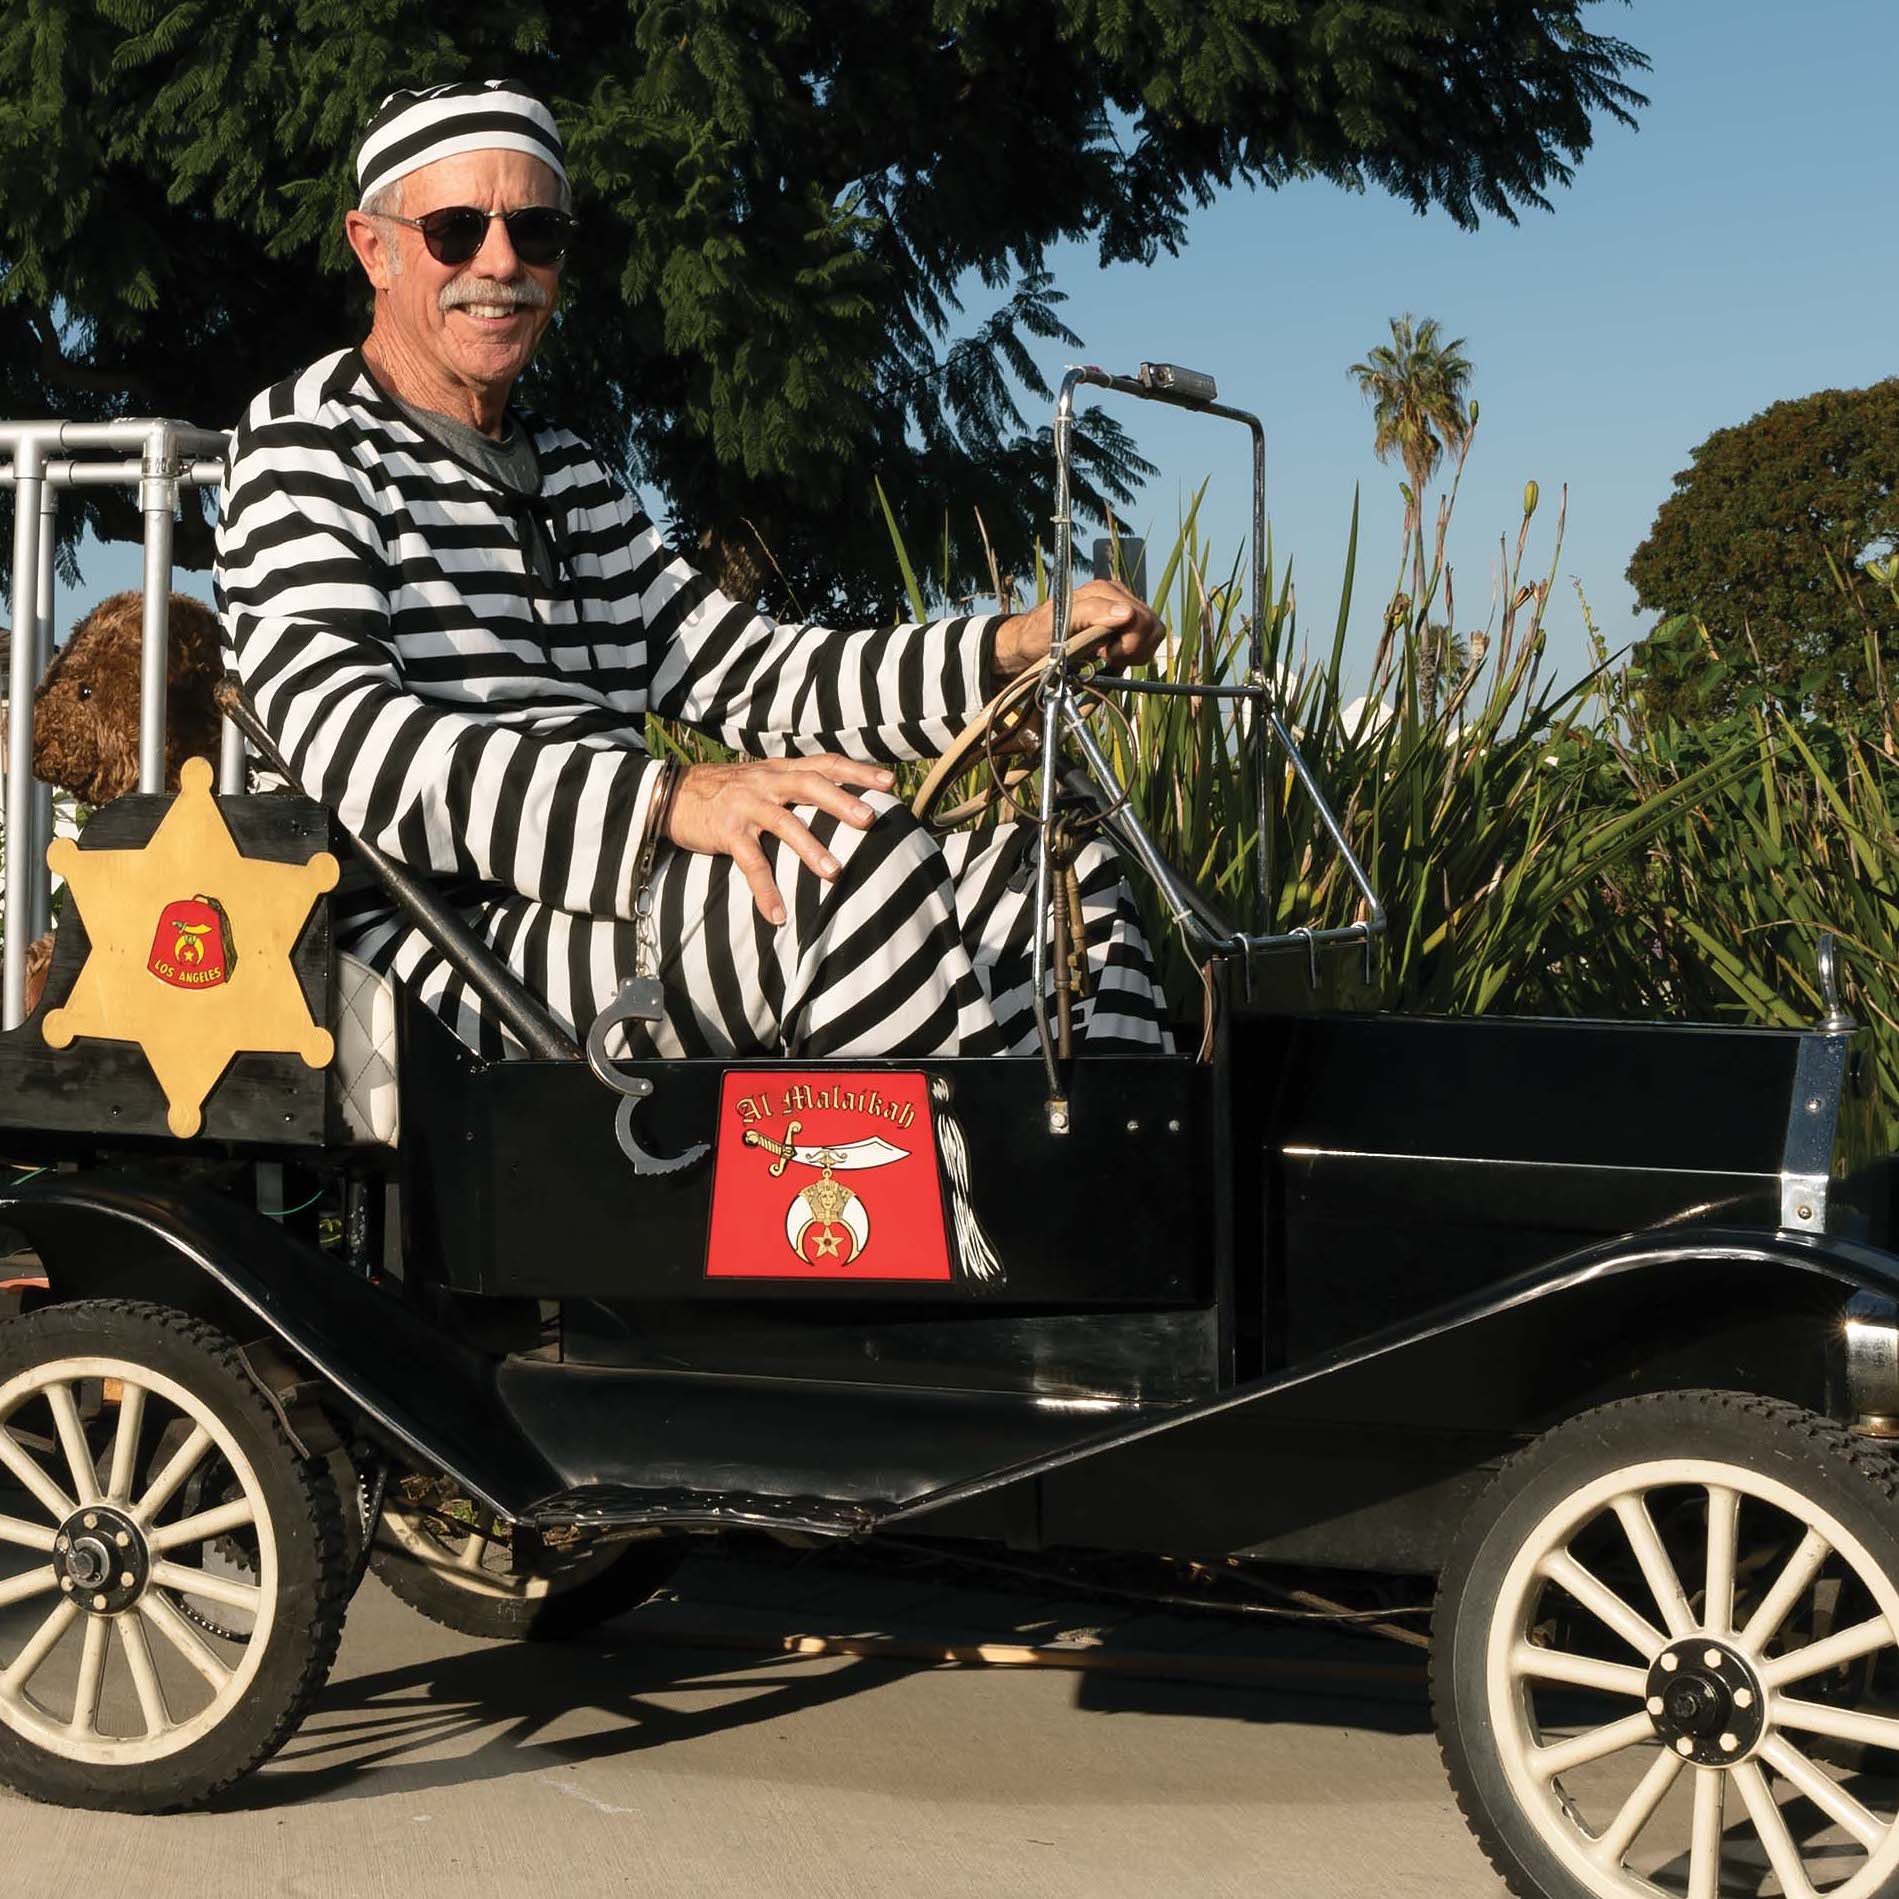 William Lavoie shows off his Special Ride: A Shriners Clown Car.